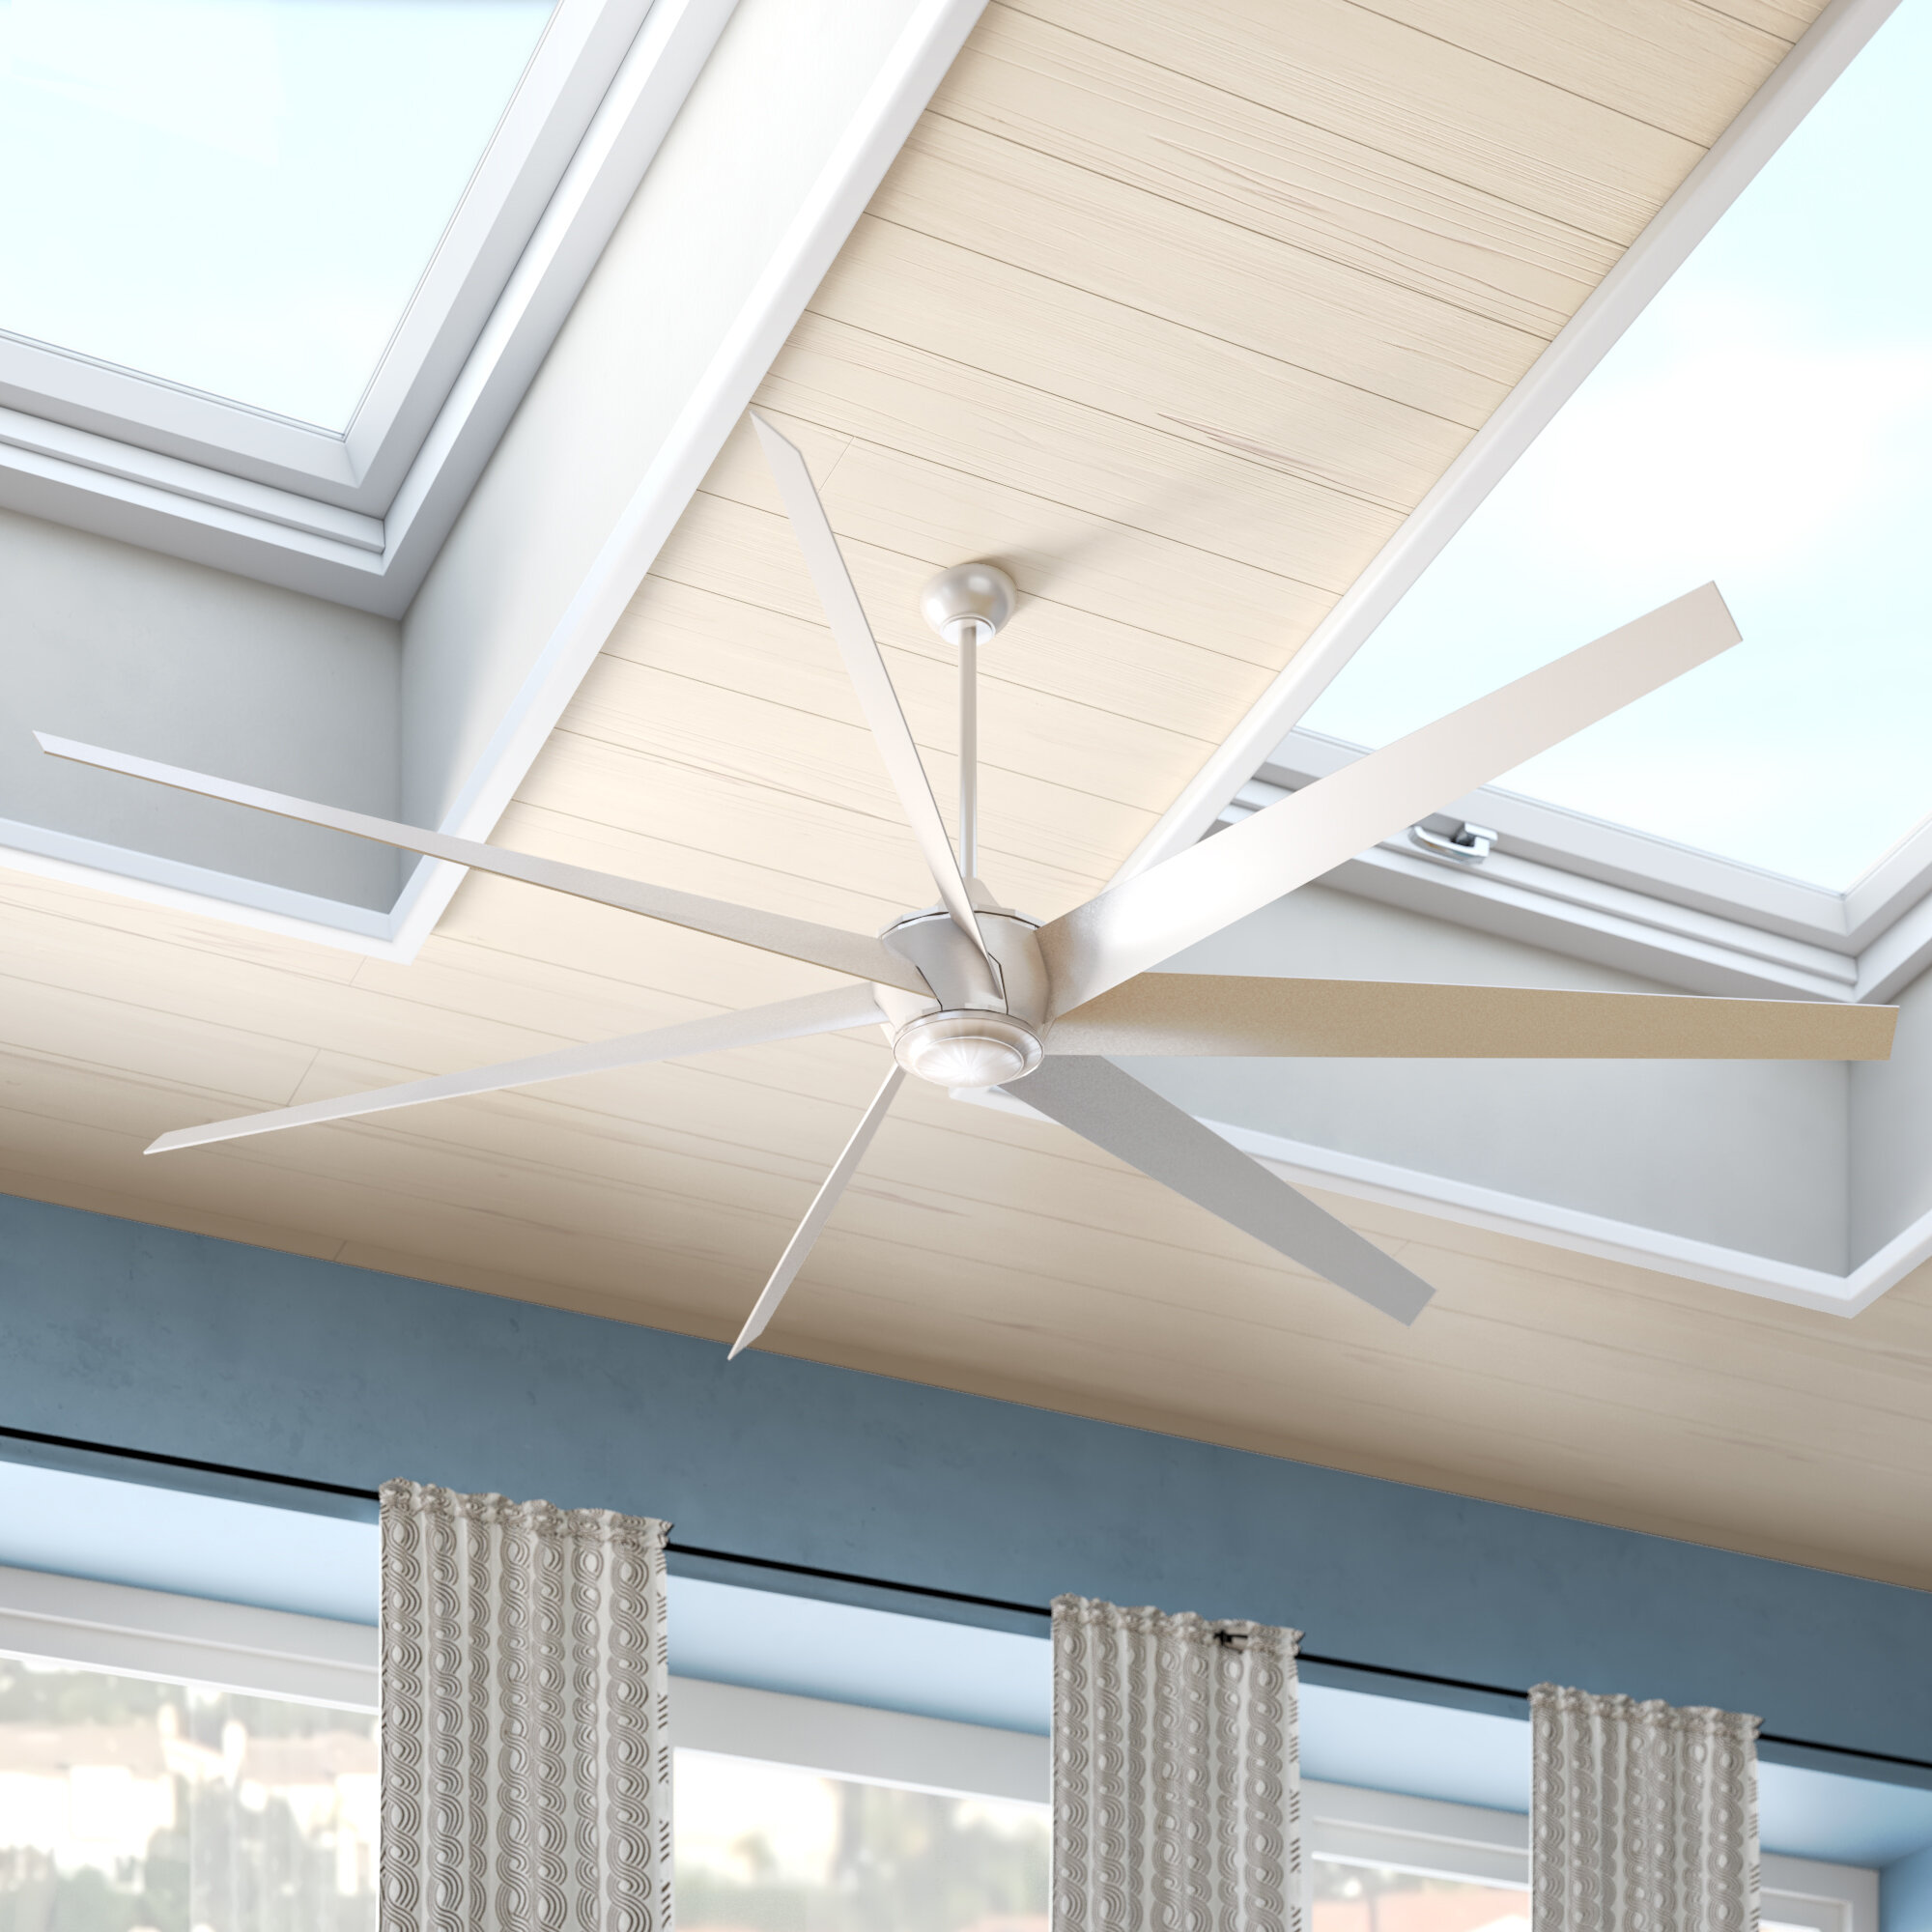 Oversized Three Speeds Or More Outdoor Ceiling Fans Youll Love In 2021 Wayfair